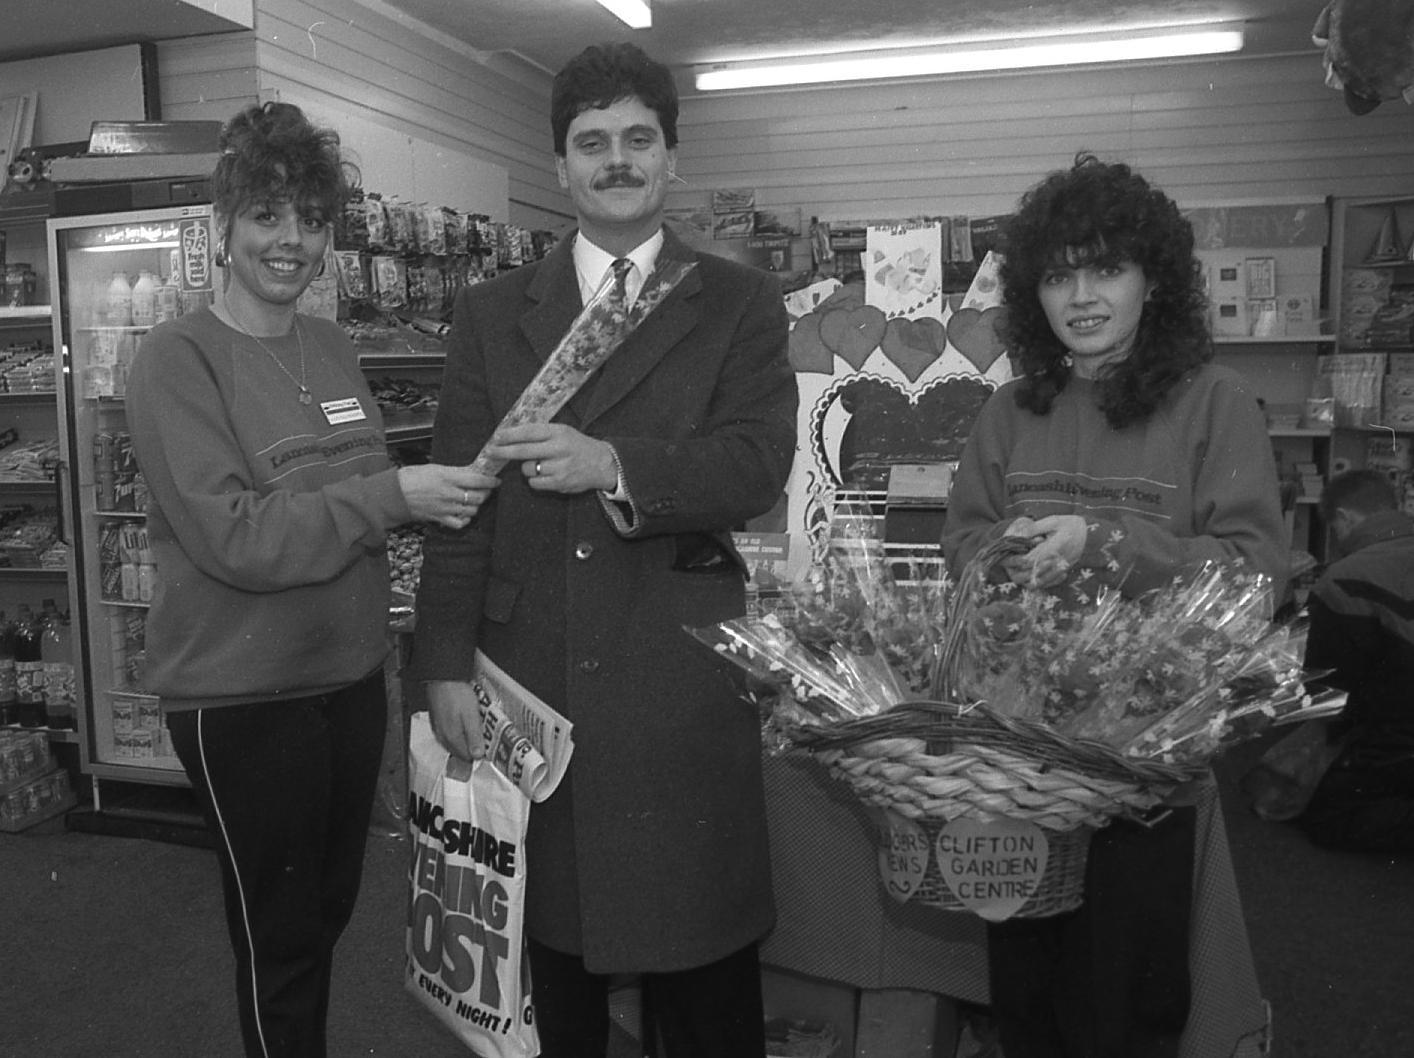 A red rose for a well-read customer was the order of the day at a special St Valentine's party in Kirkham. Pledgers News on Poulton Street was visited by the Evening Post promotions girls, waiting to hand out red roses - supplied by Clifton Garden Centre - to people buying the newspaper. Chris Halliday (pictured) was obviously pleased with his romantic gift, presented by Julie Hollingworth